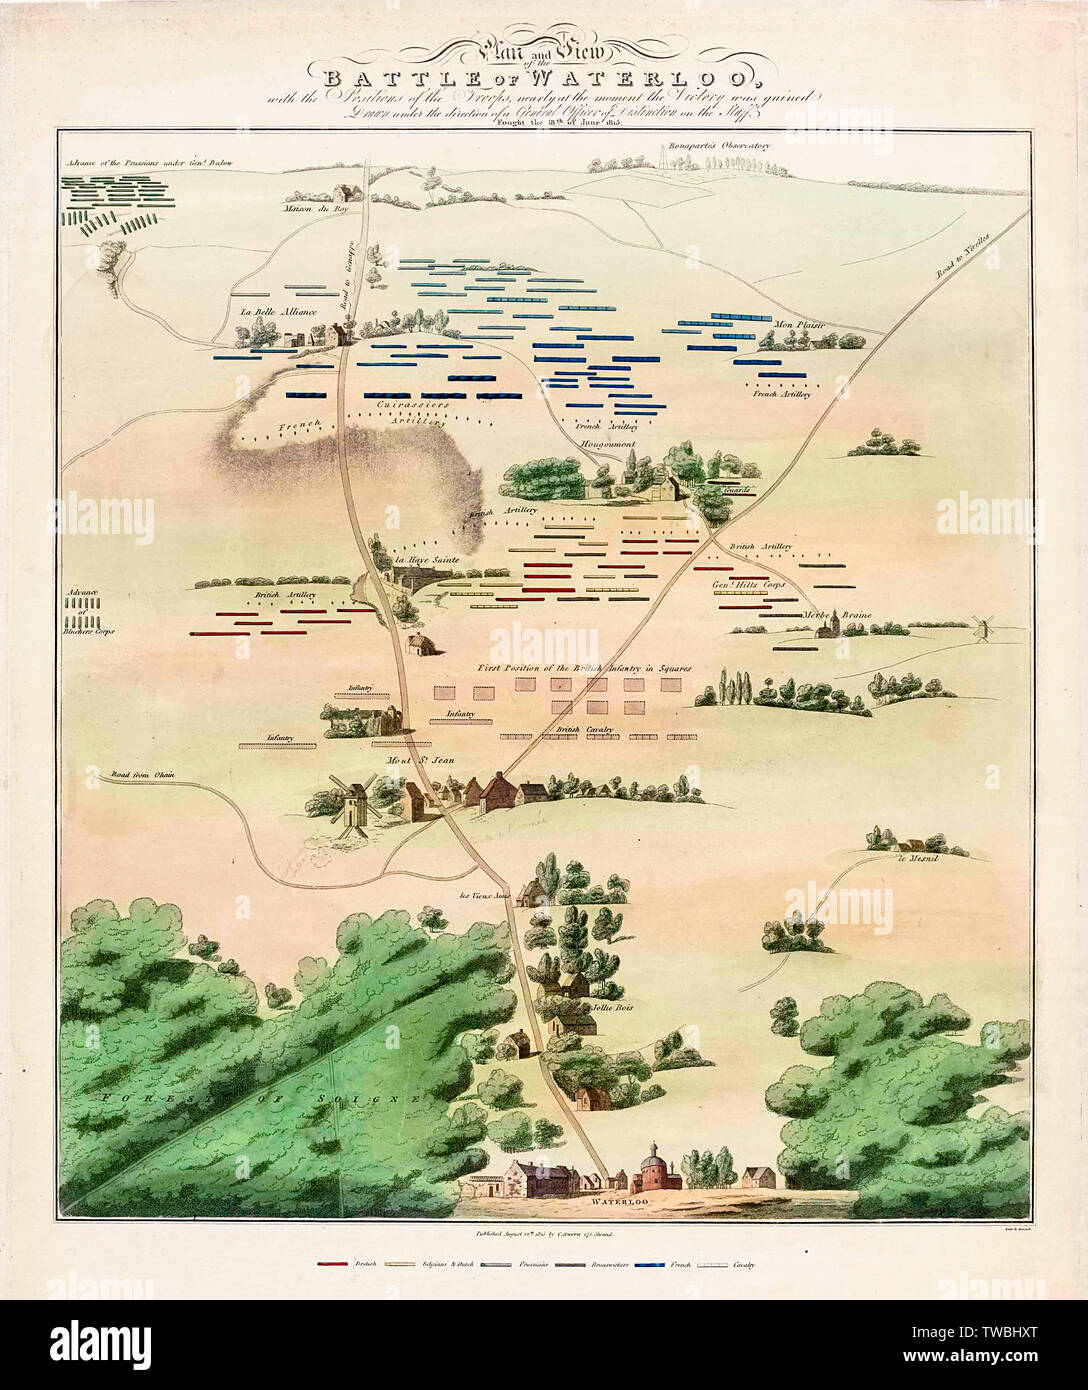 Map and View of the Battle of Waterloo, print, 1815 Stock Photo